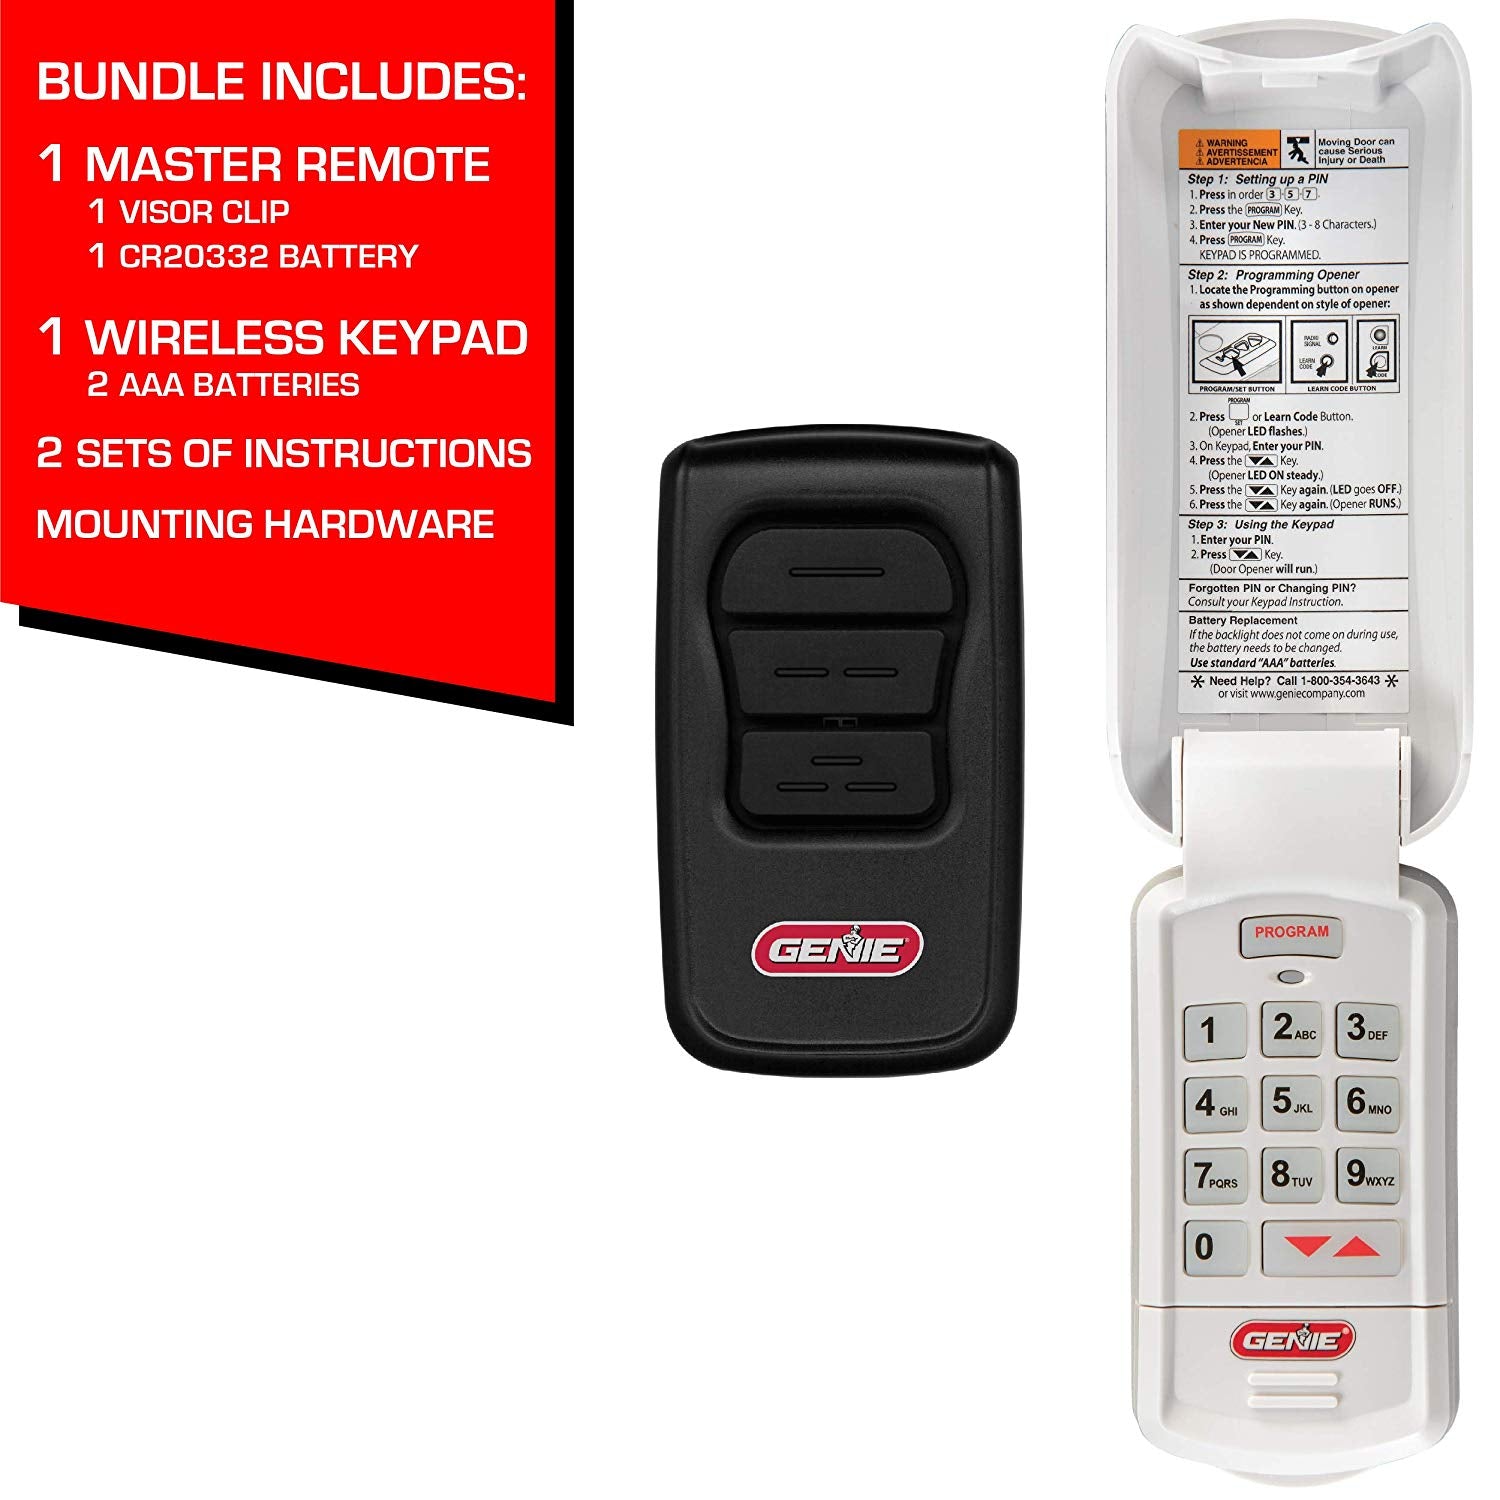 Genie garage door opener accessory bundle remote and keypad comes with programming instructions